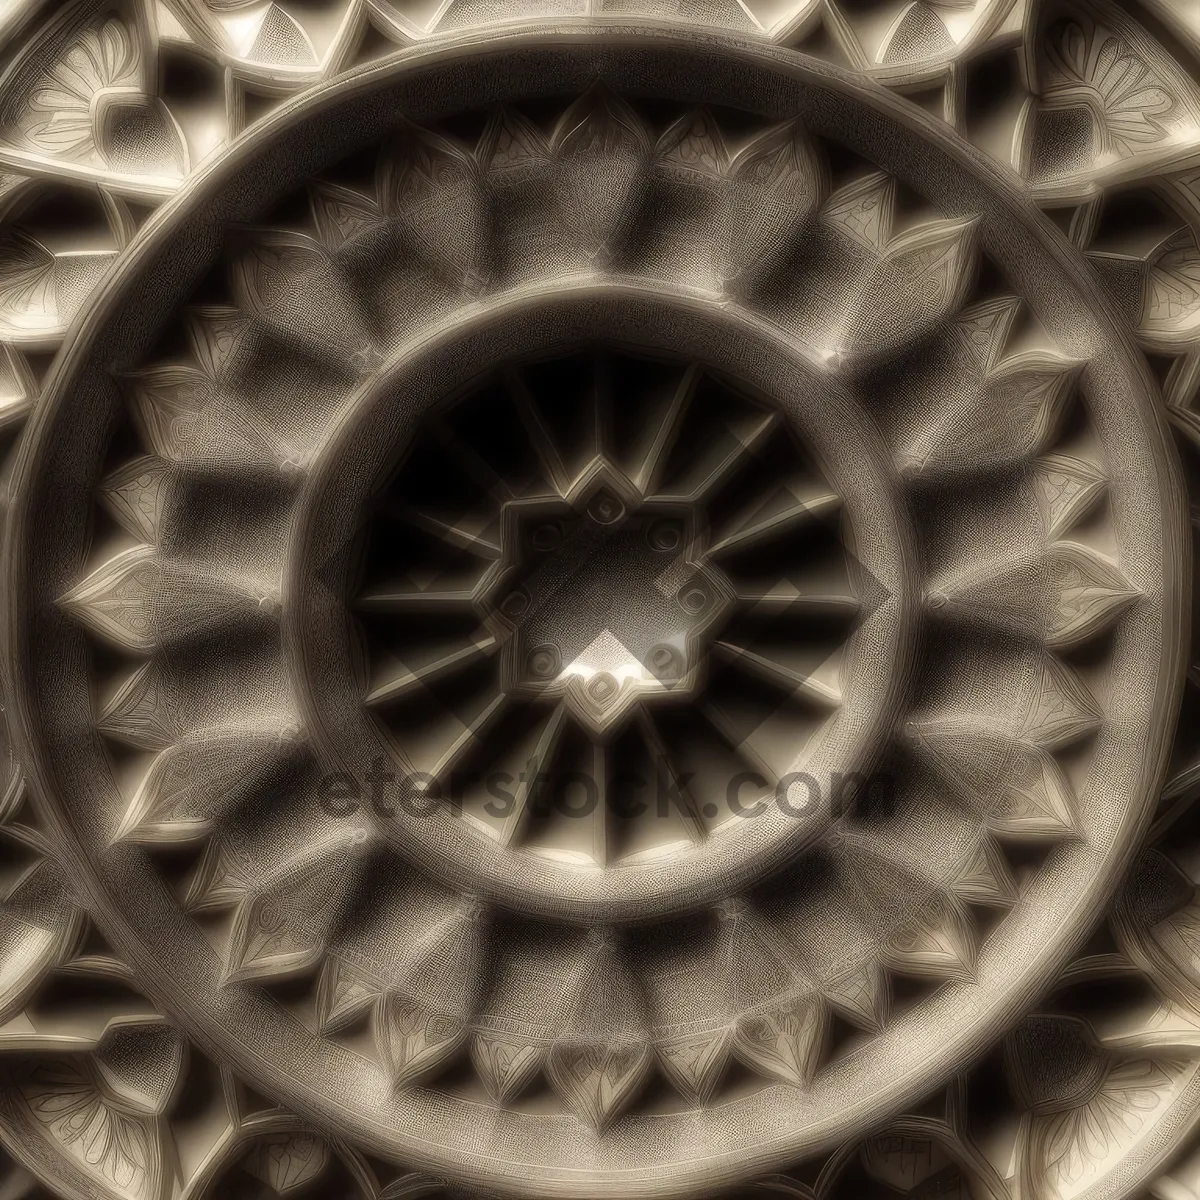 Picture of Vintage Handheld Strainer Filter with Intricate Wheel Design.